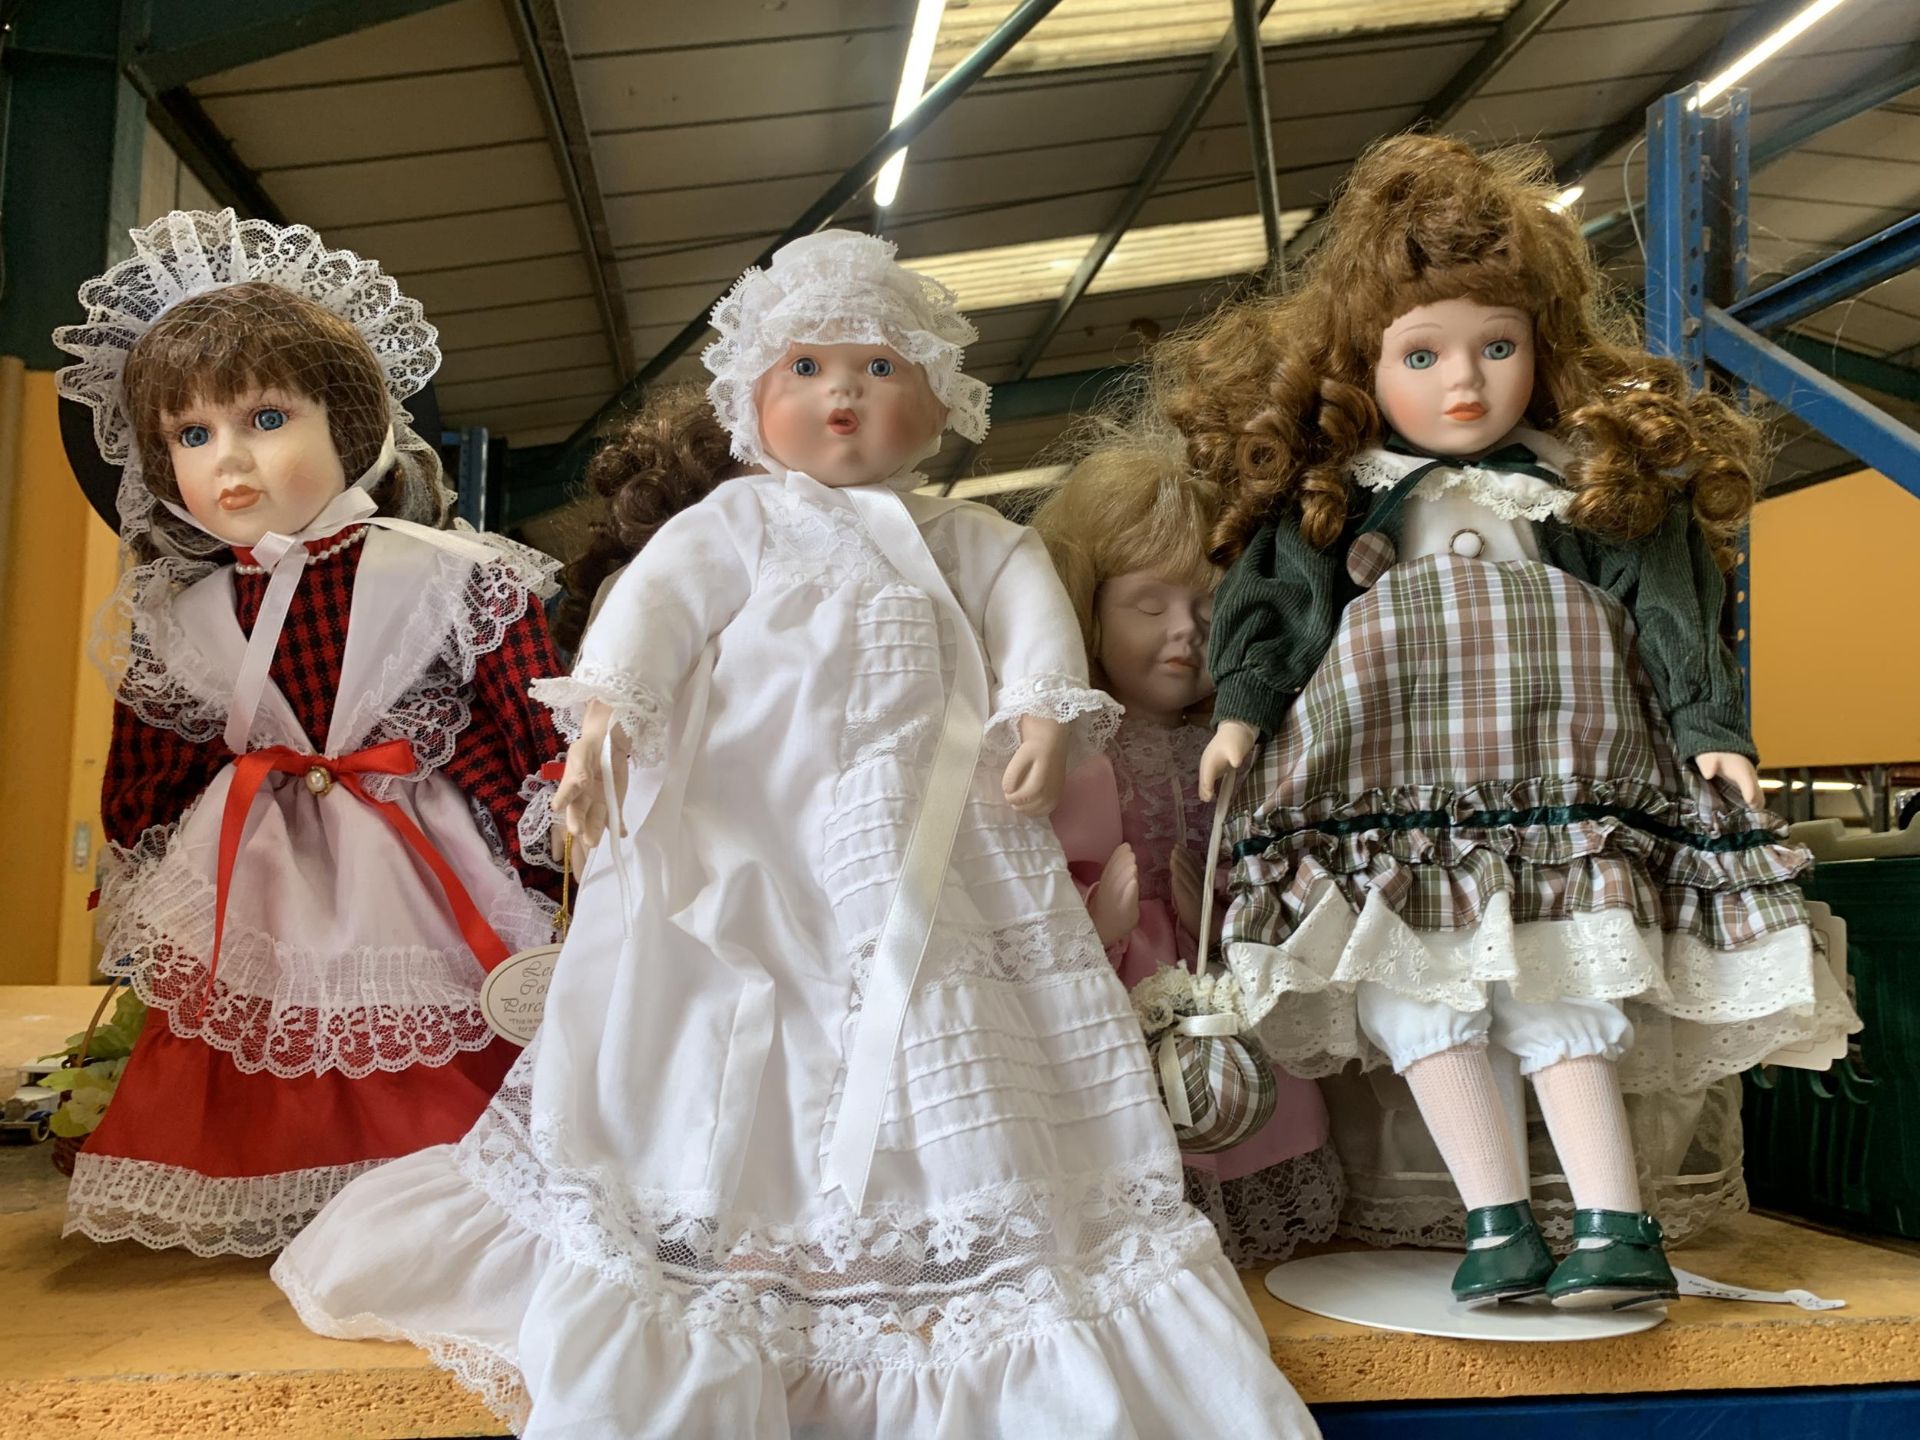 A GROUP OF DOLL MODELS ON STANDS WITH A BOXED EXAMPLE